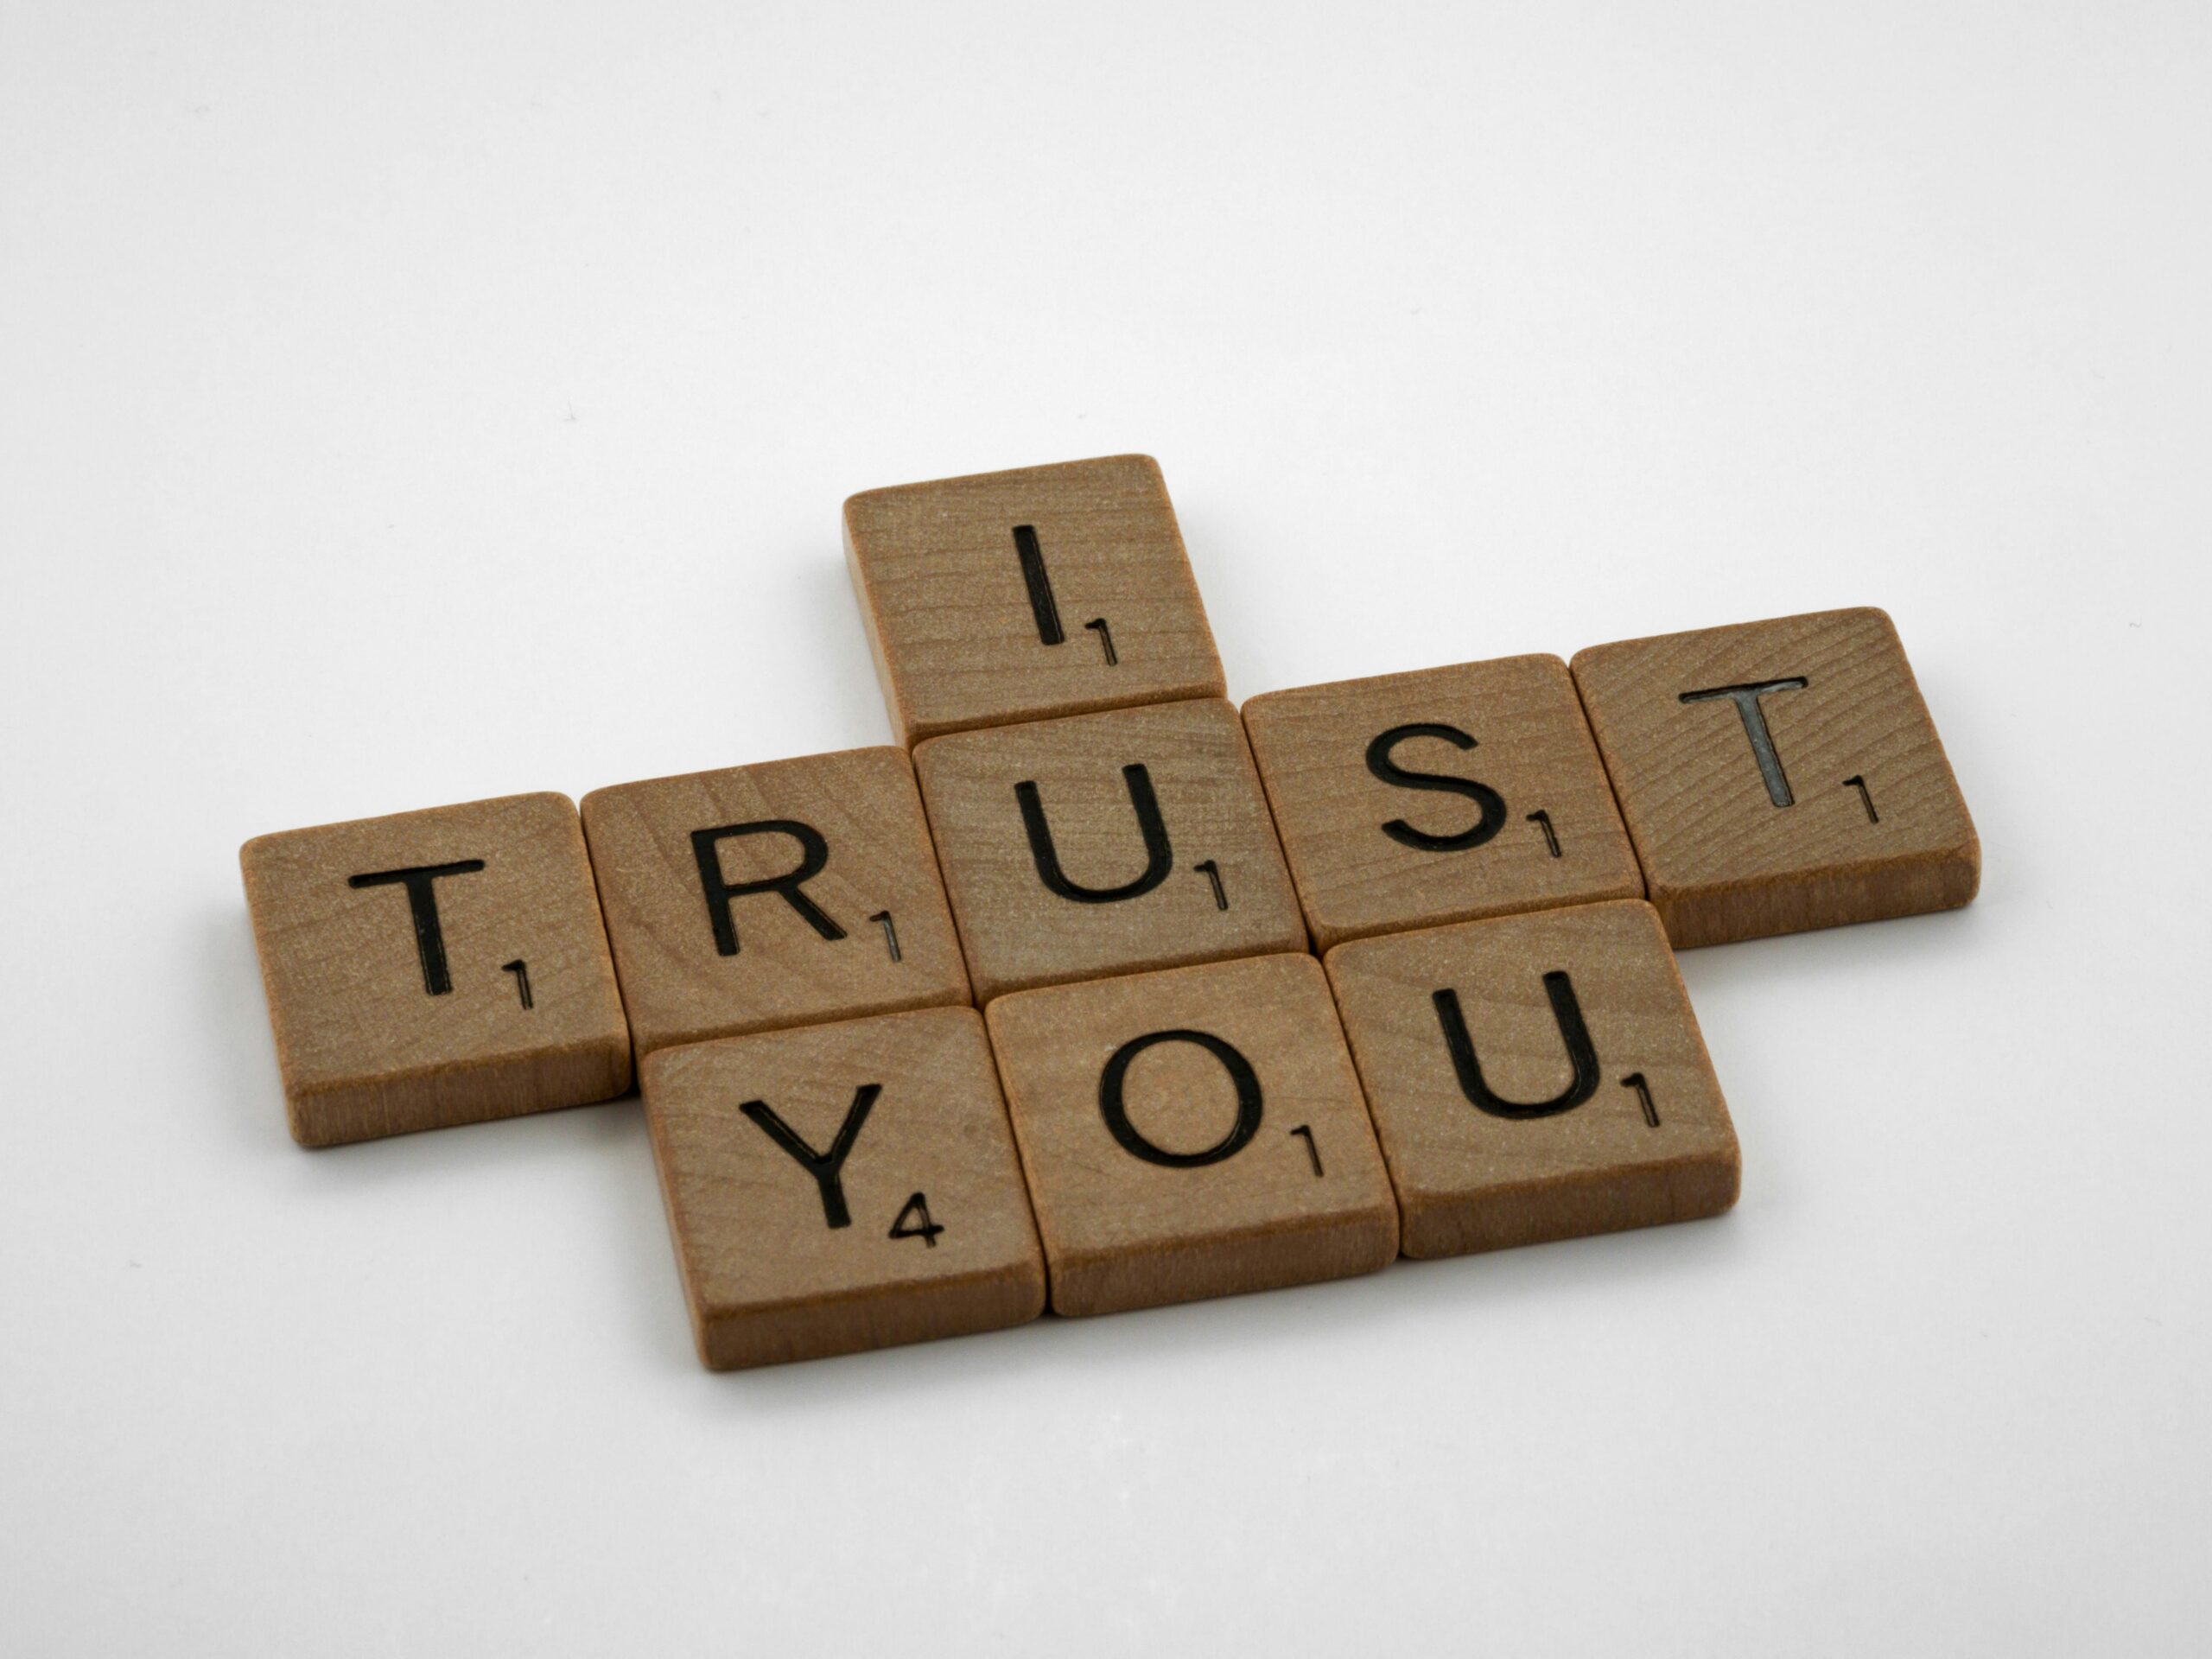 How to heal trust issues?